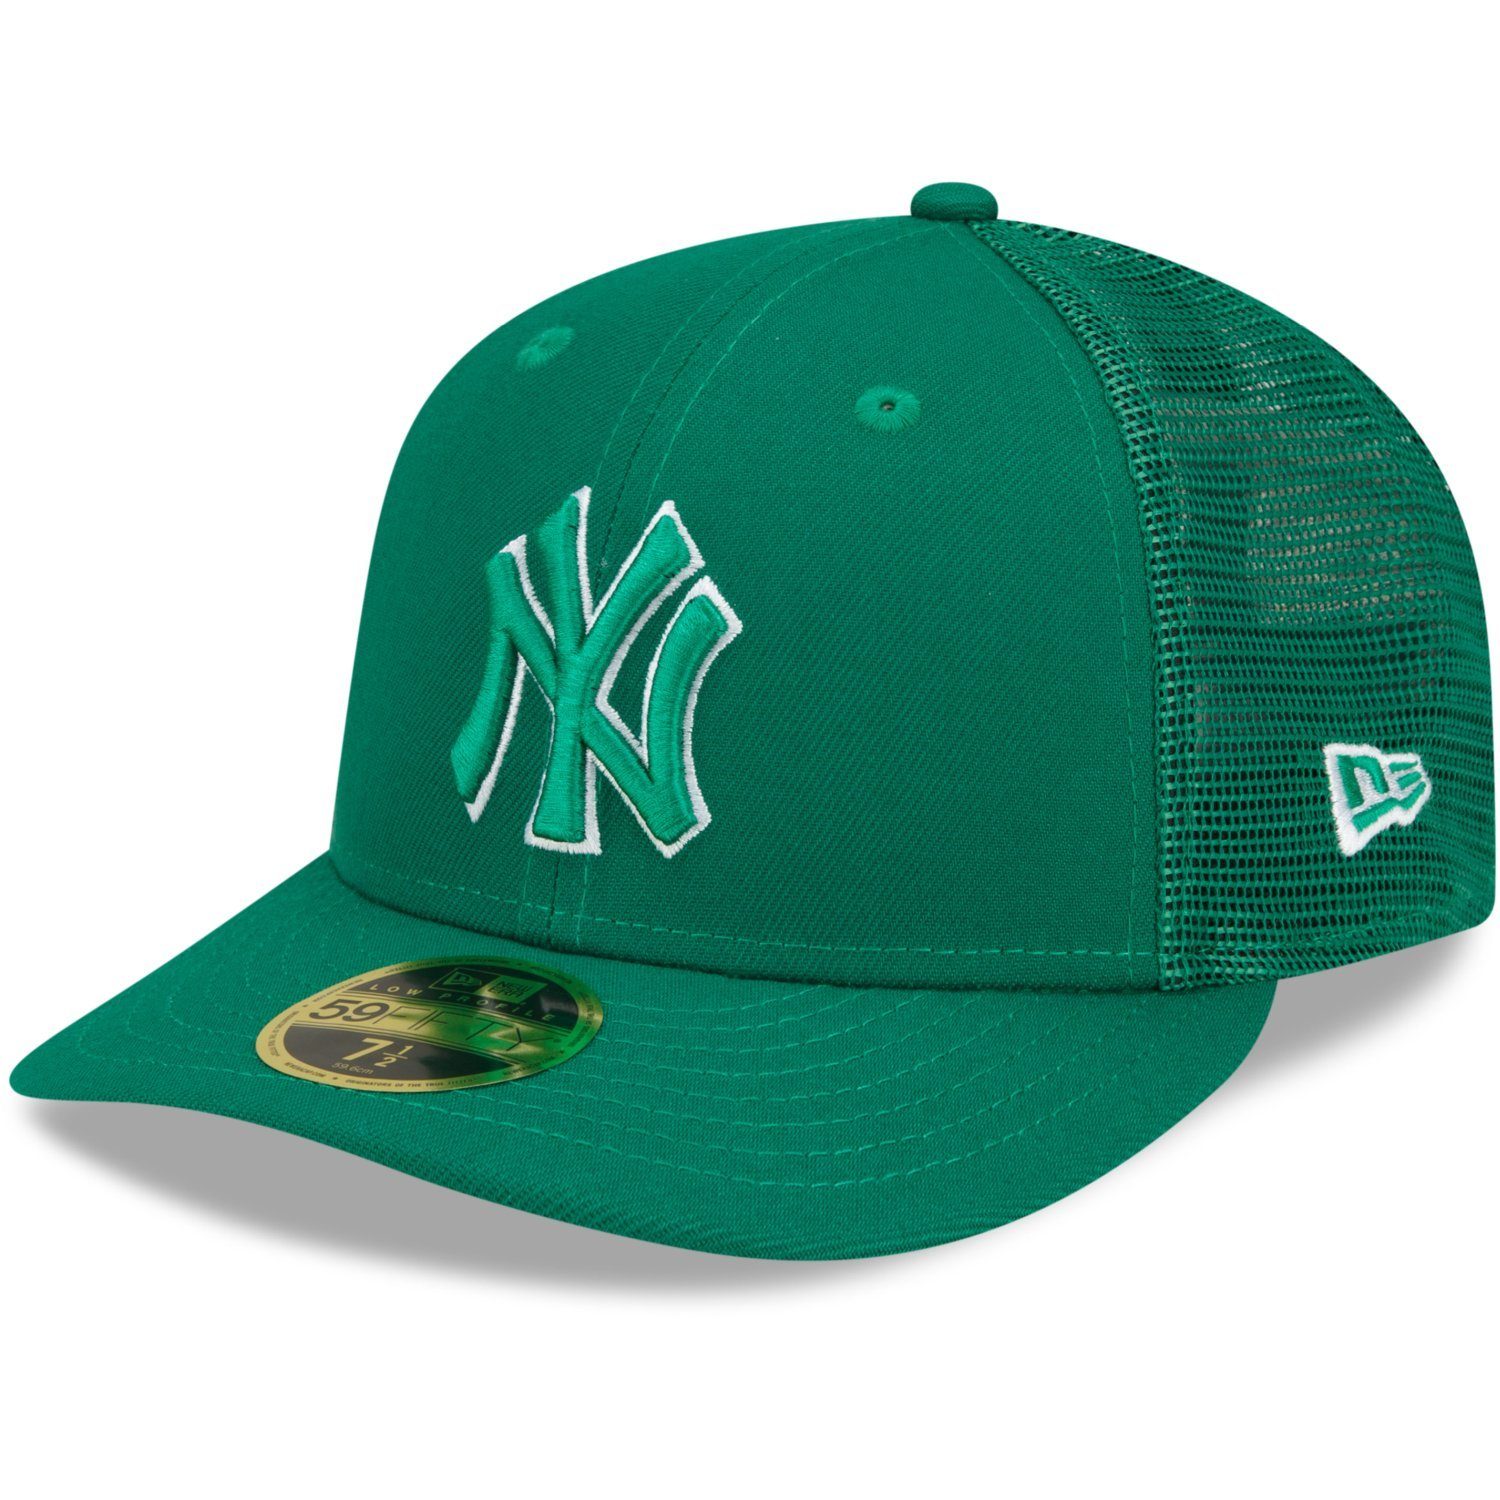 Low New 59Fifty New Era Profile ST. PATRICK’S Cap Fitted DAY York